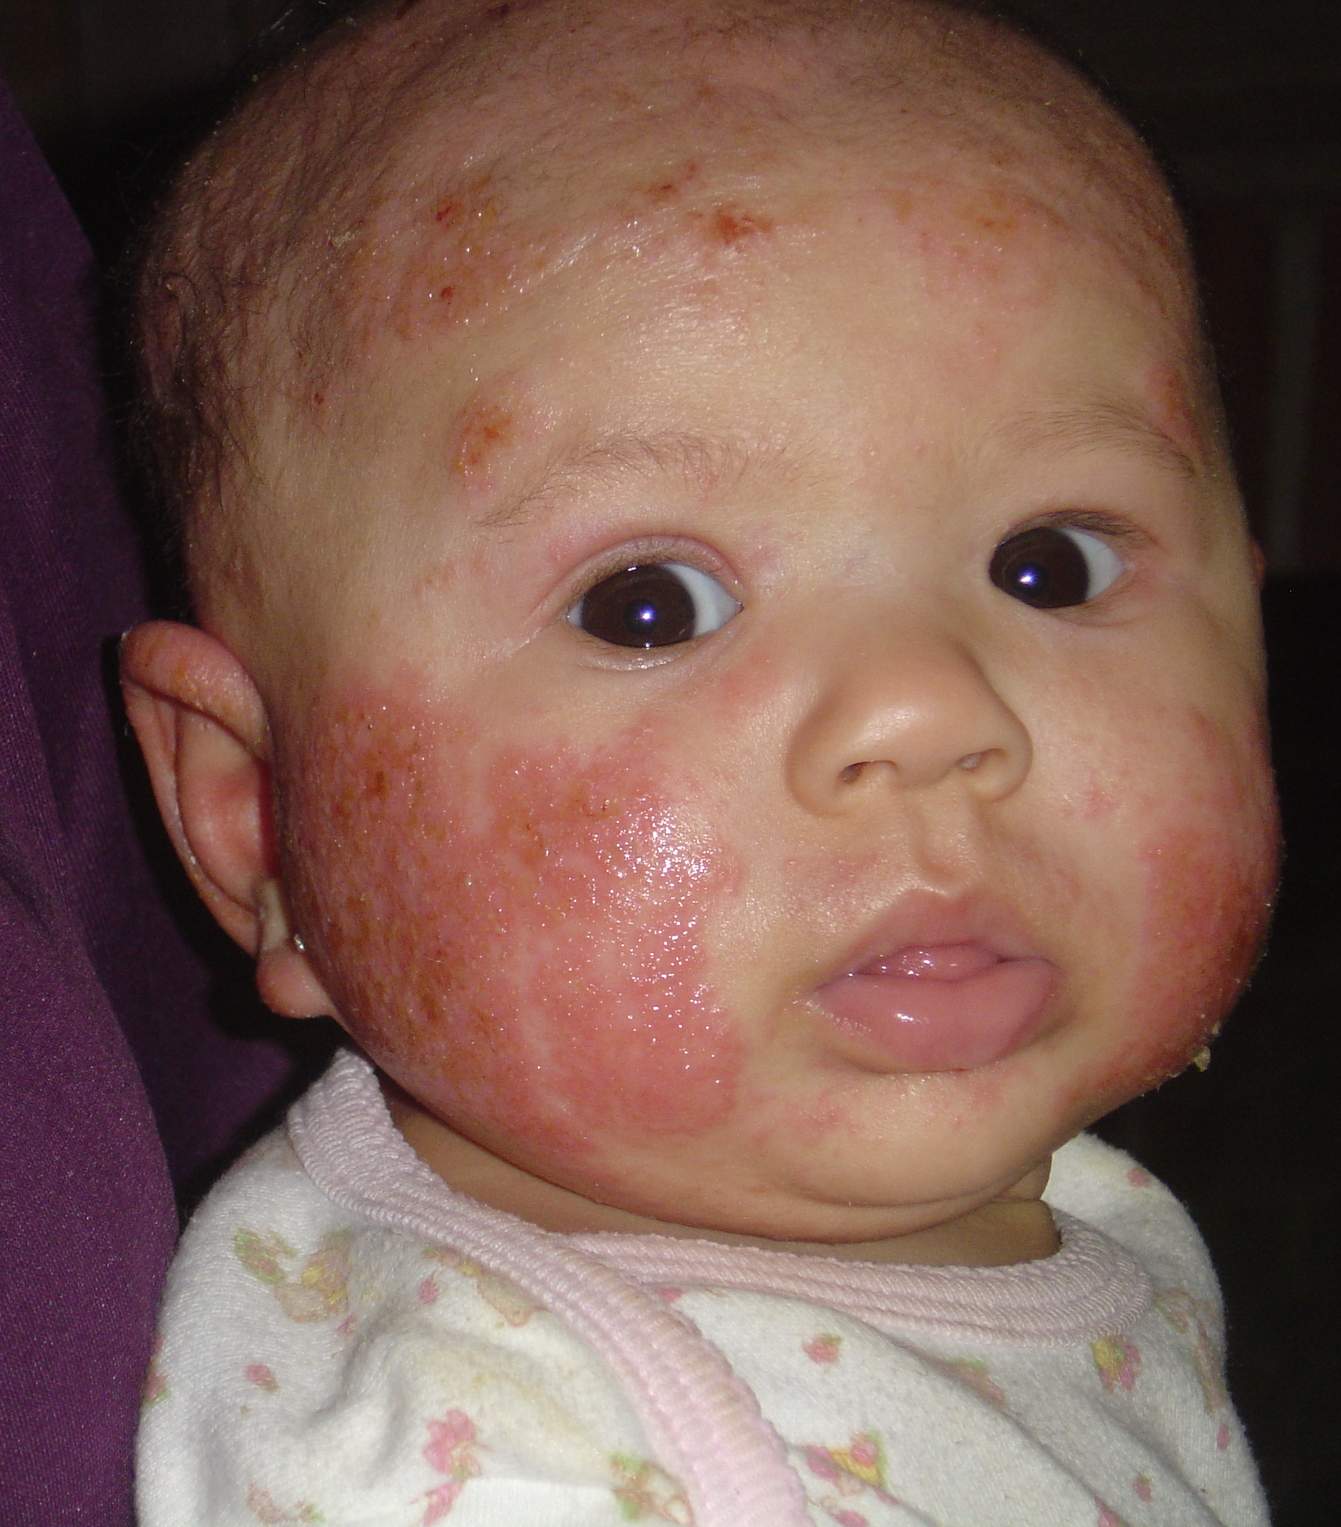 Baby Face Eczema Pictures